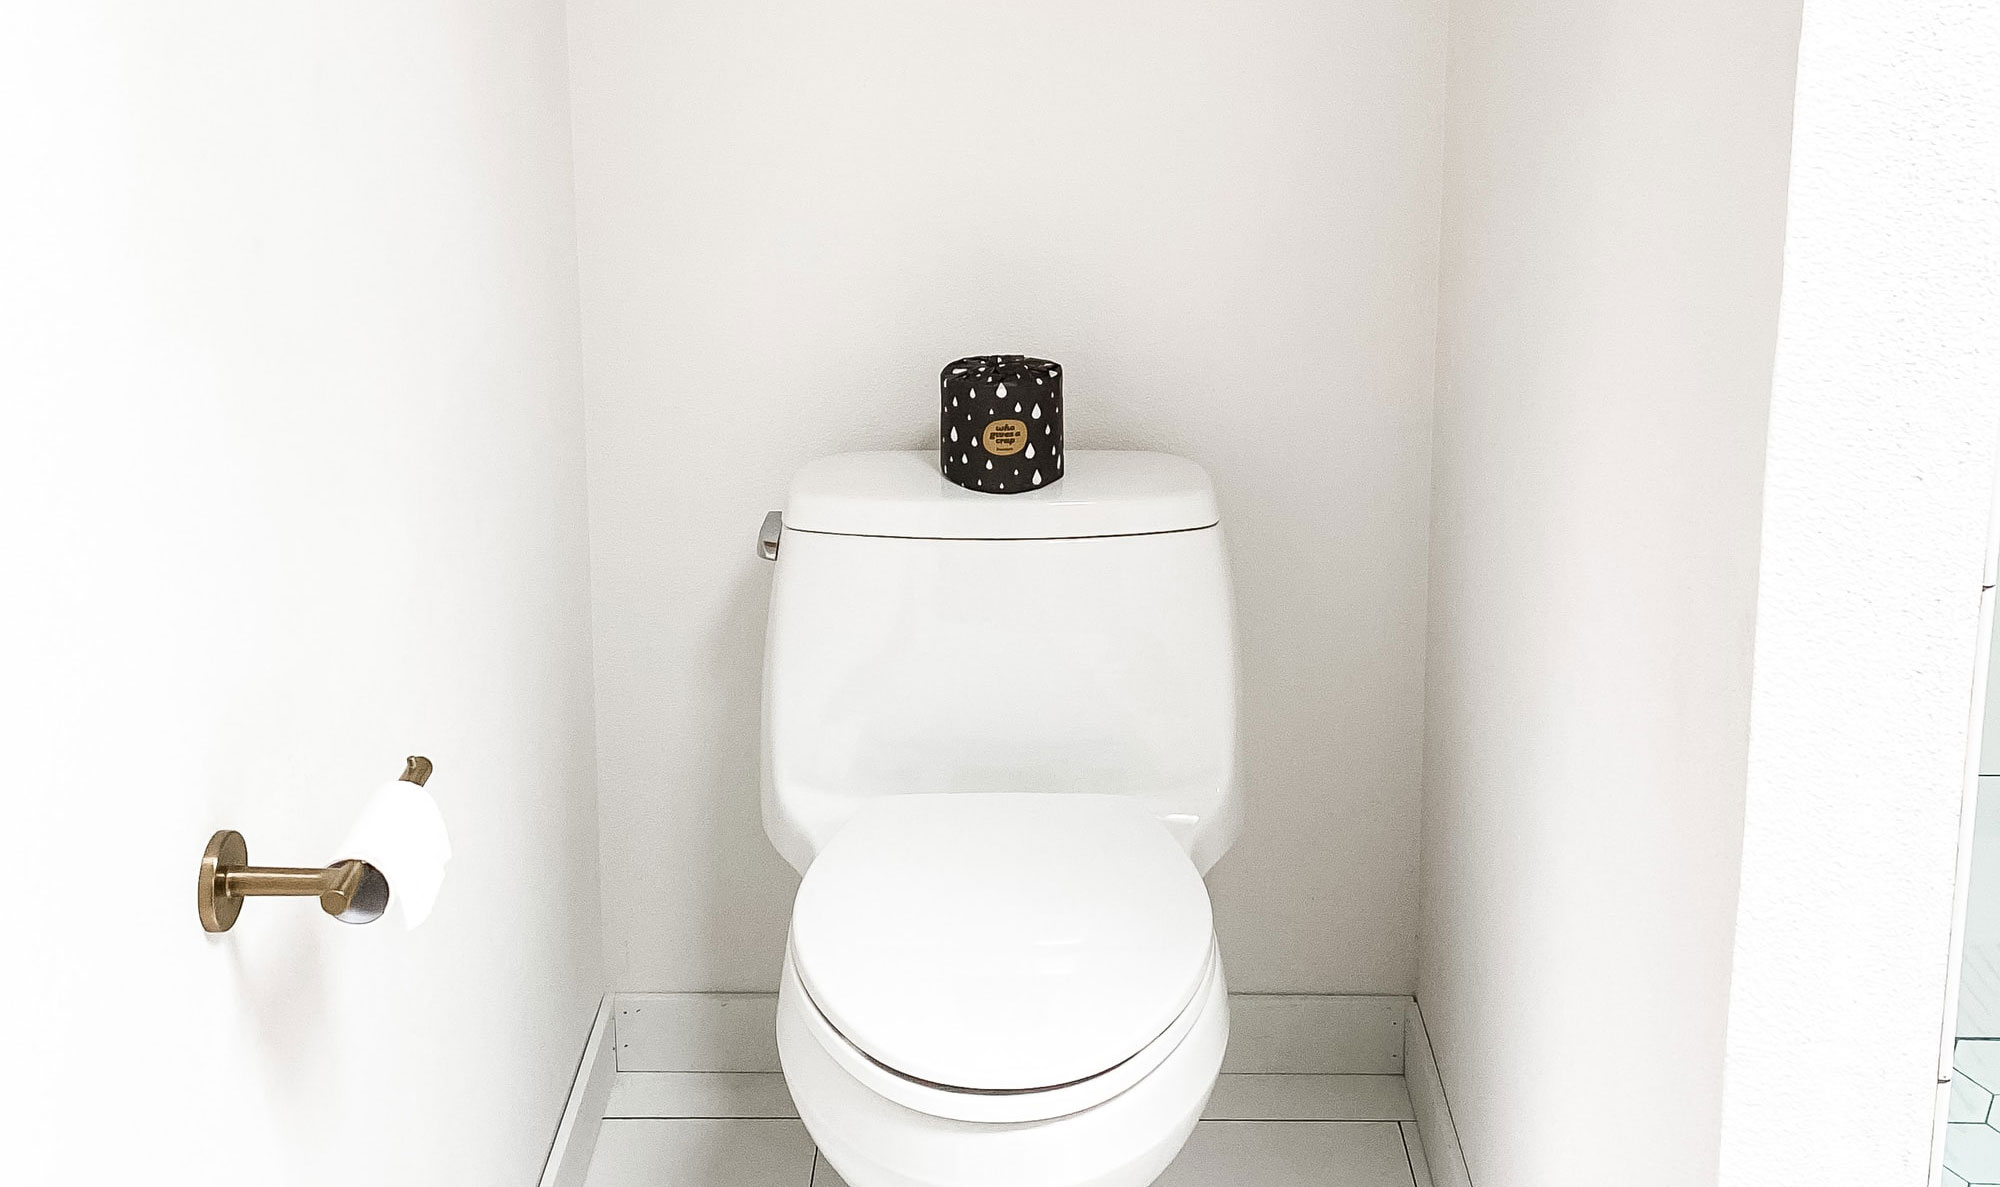 Image of a toilet bowl and a toilet seat ready to sit on them in the bathroom.